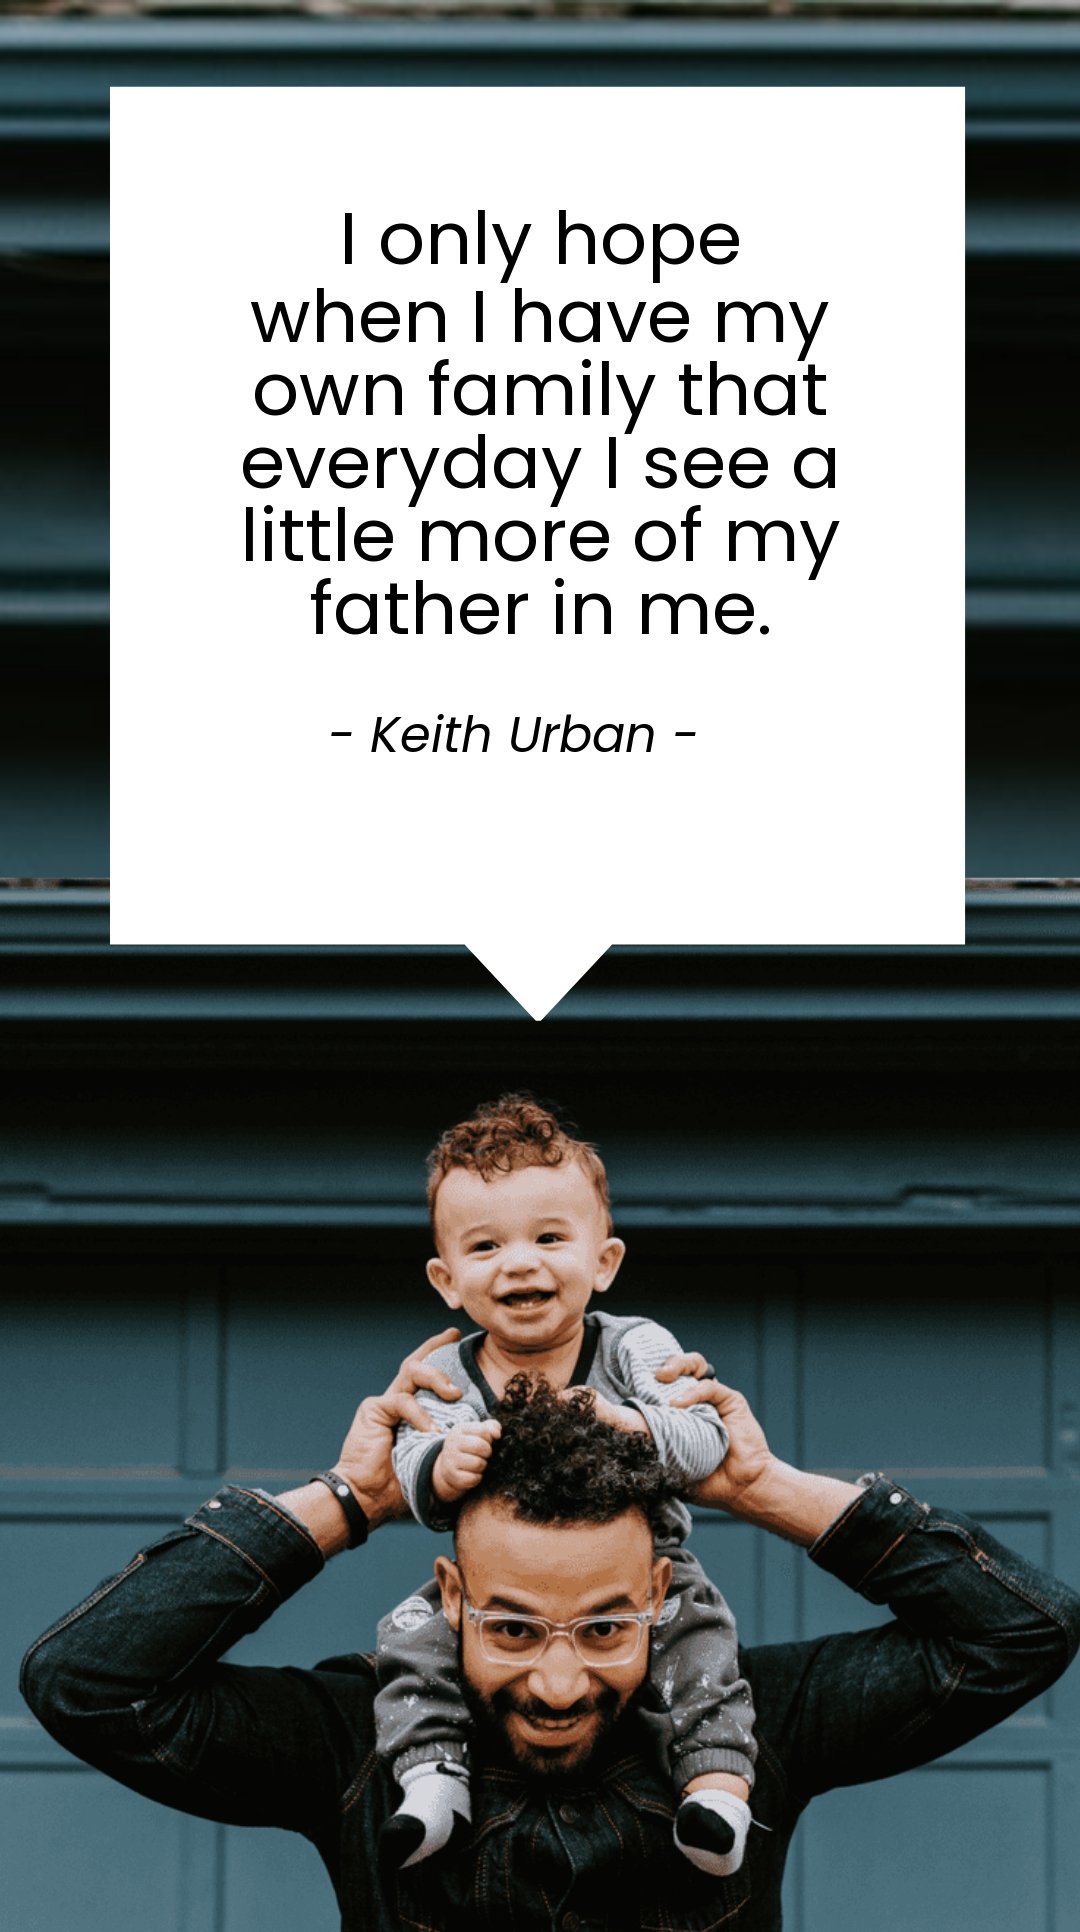 Keith Urban - I only hope when I have my own family that everyday I see a little more of my father in me.